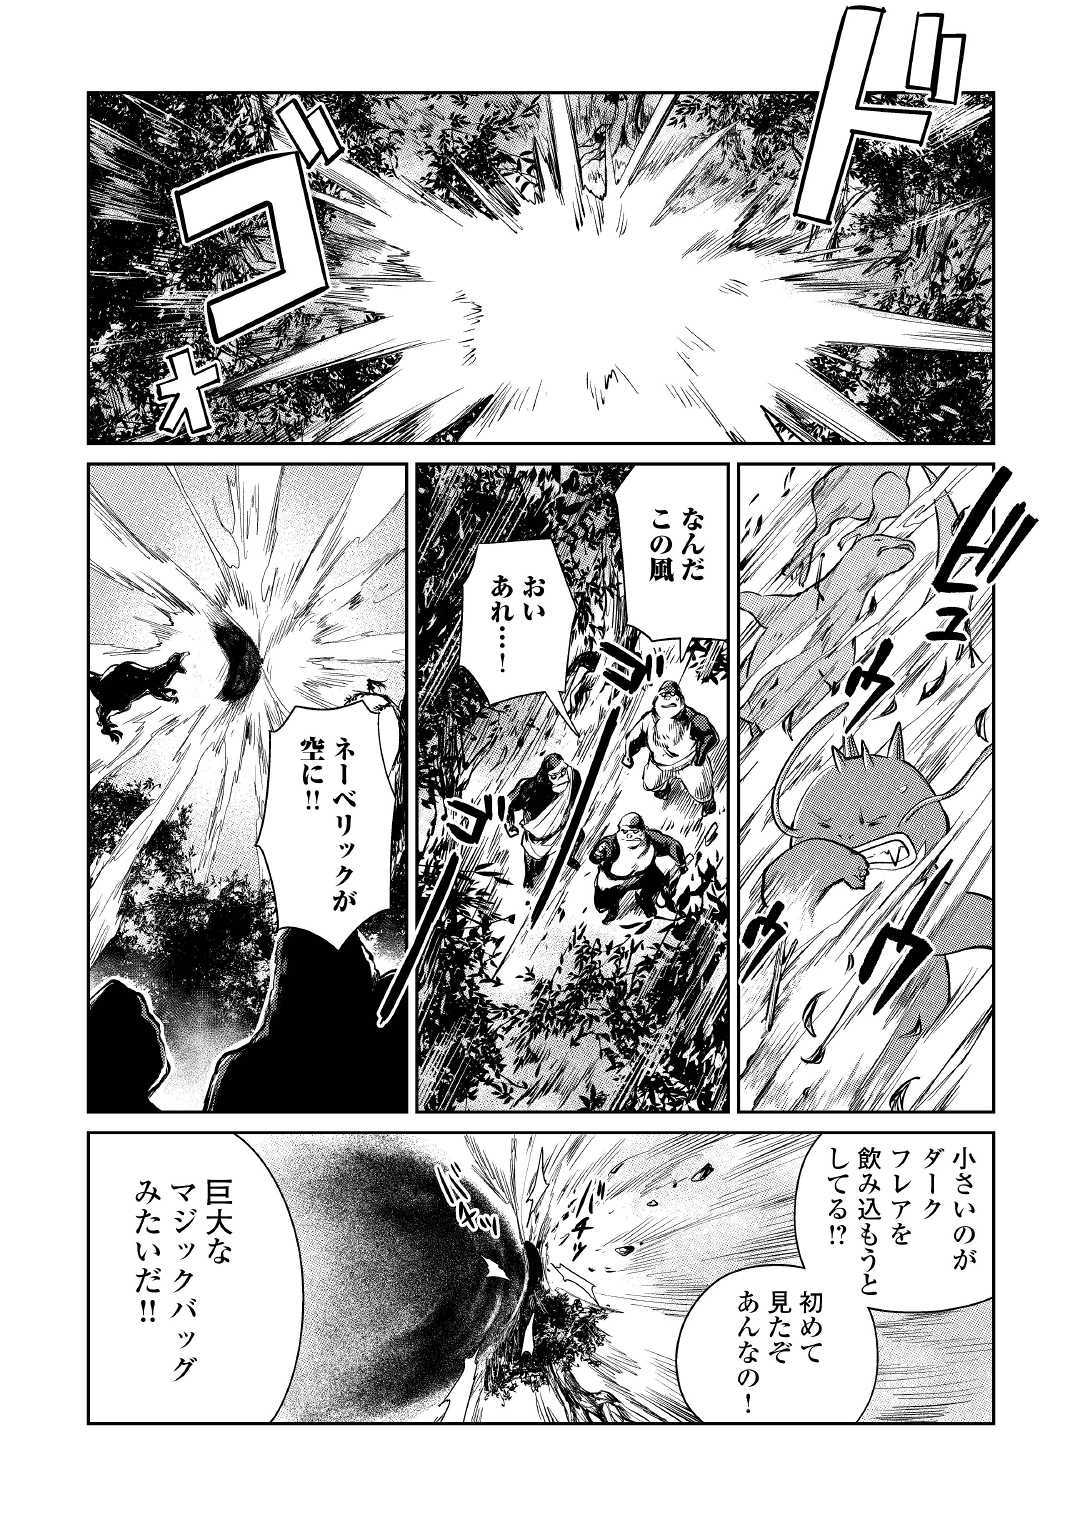 The Former Structural Researcher’s Story of Otherworldly Adventure 第17話 - Page 15